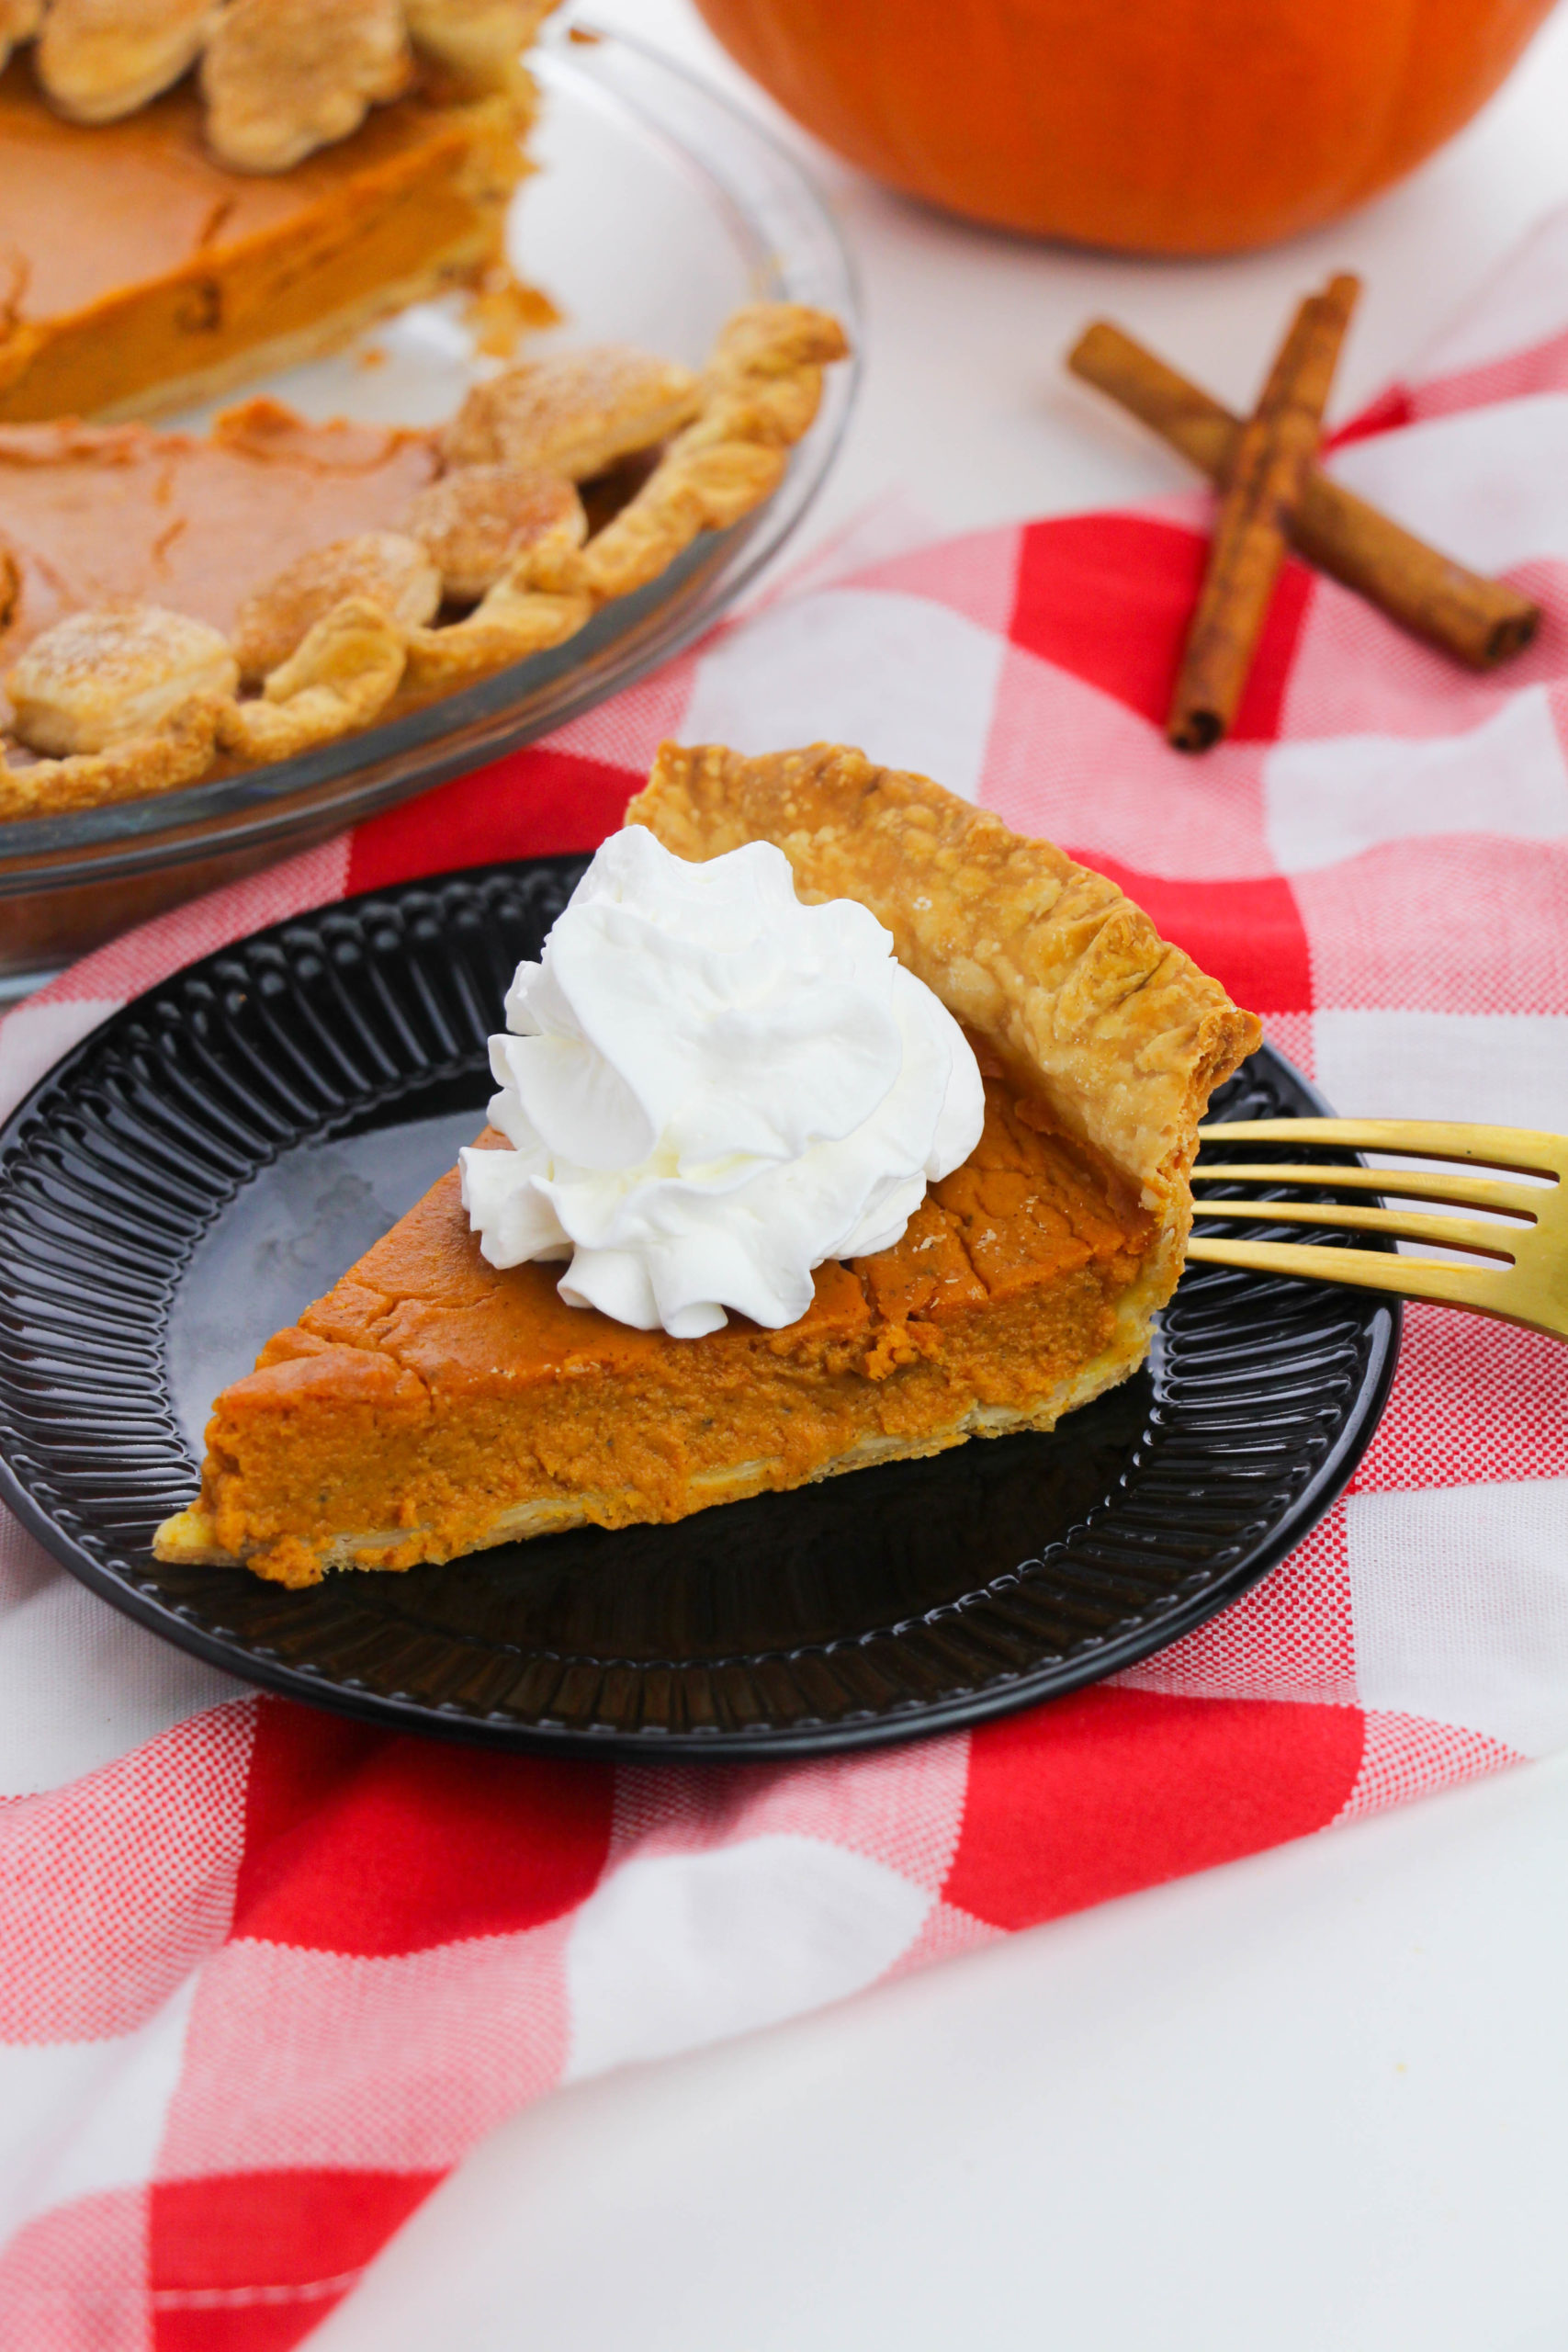 Pie on a plate with whipped cream and a fork on top of a checkered table cloth.